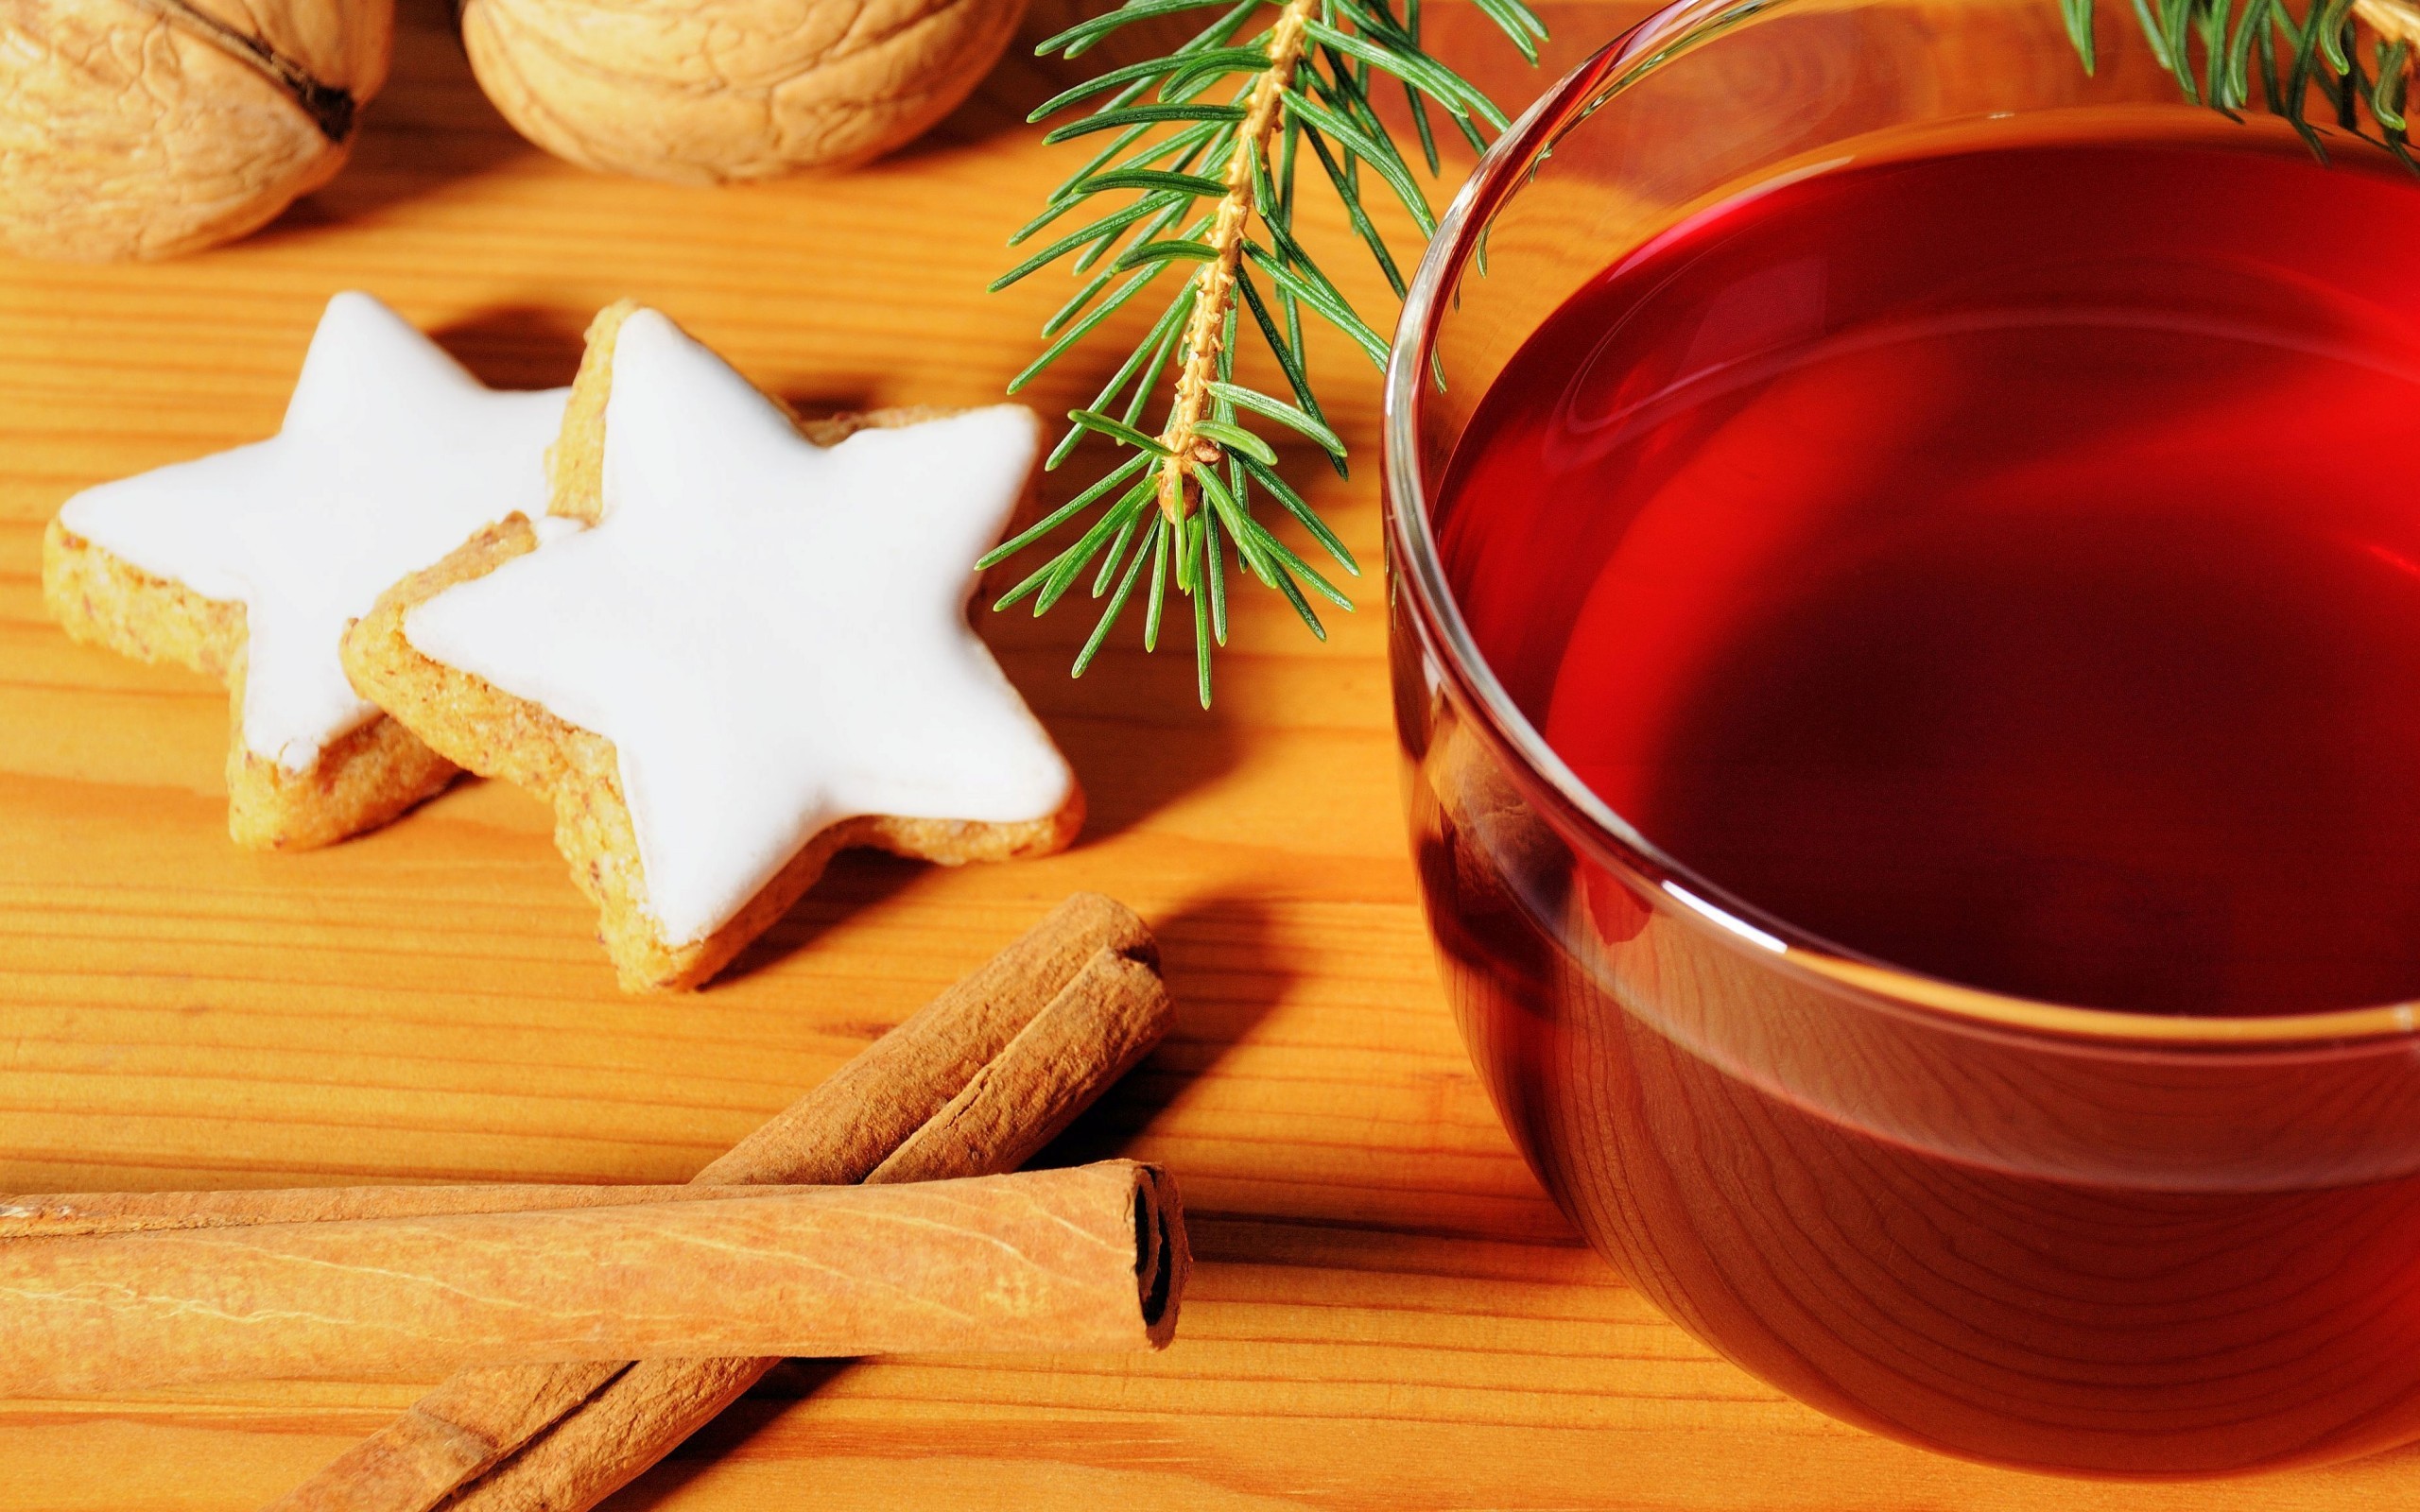 General 2560x1600 Christmas New Year cookies drink wooden surface food sweets holiday